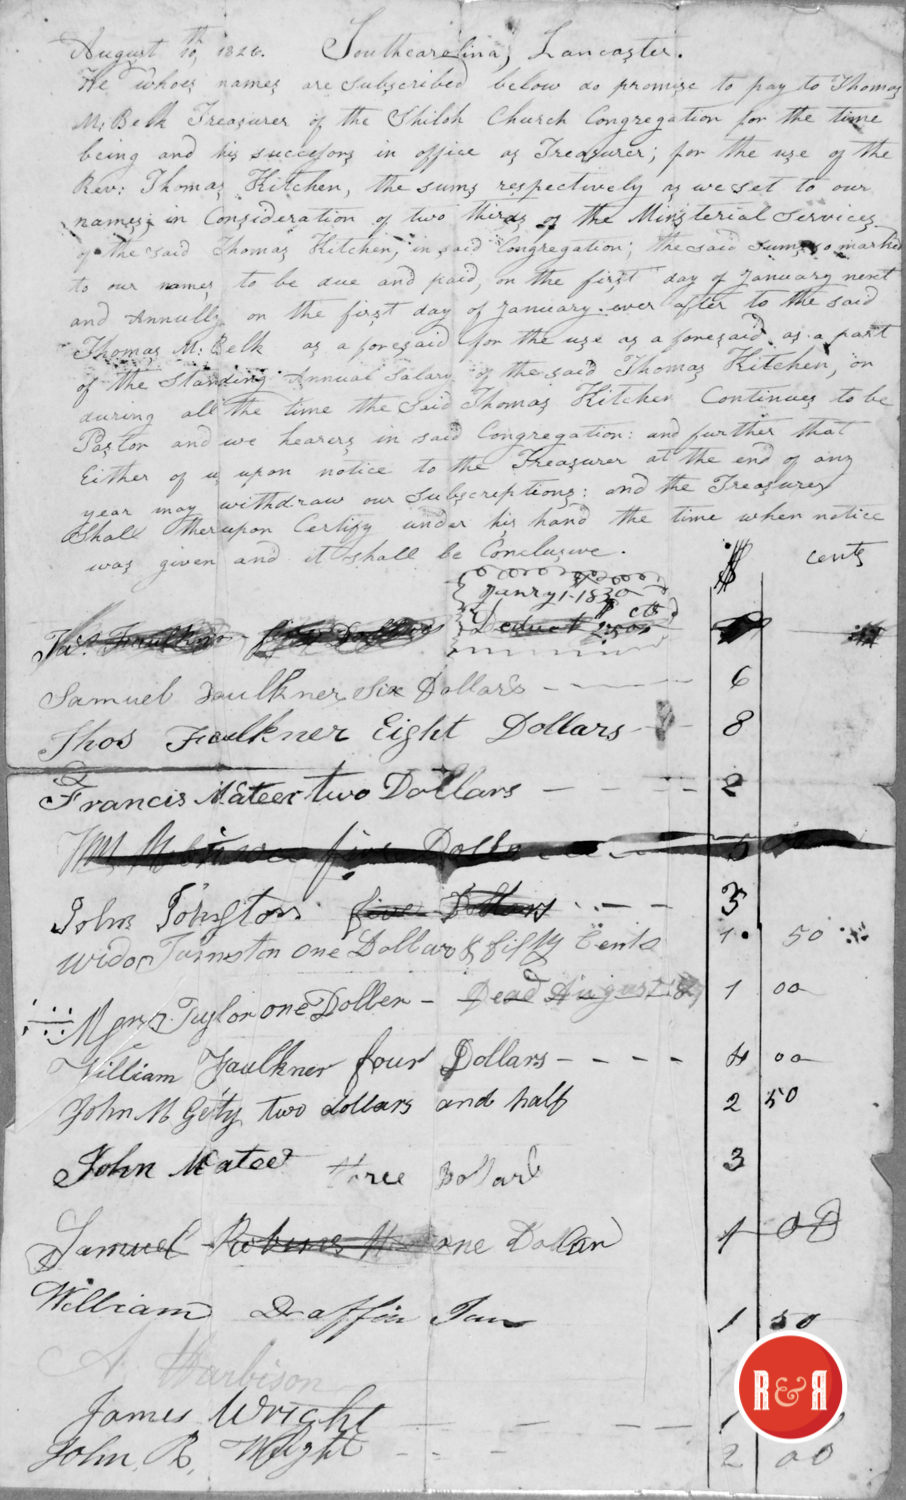 LEDGER FROM MASSEY AND MOORE - 1850s, p. 2